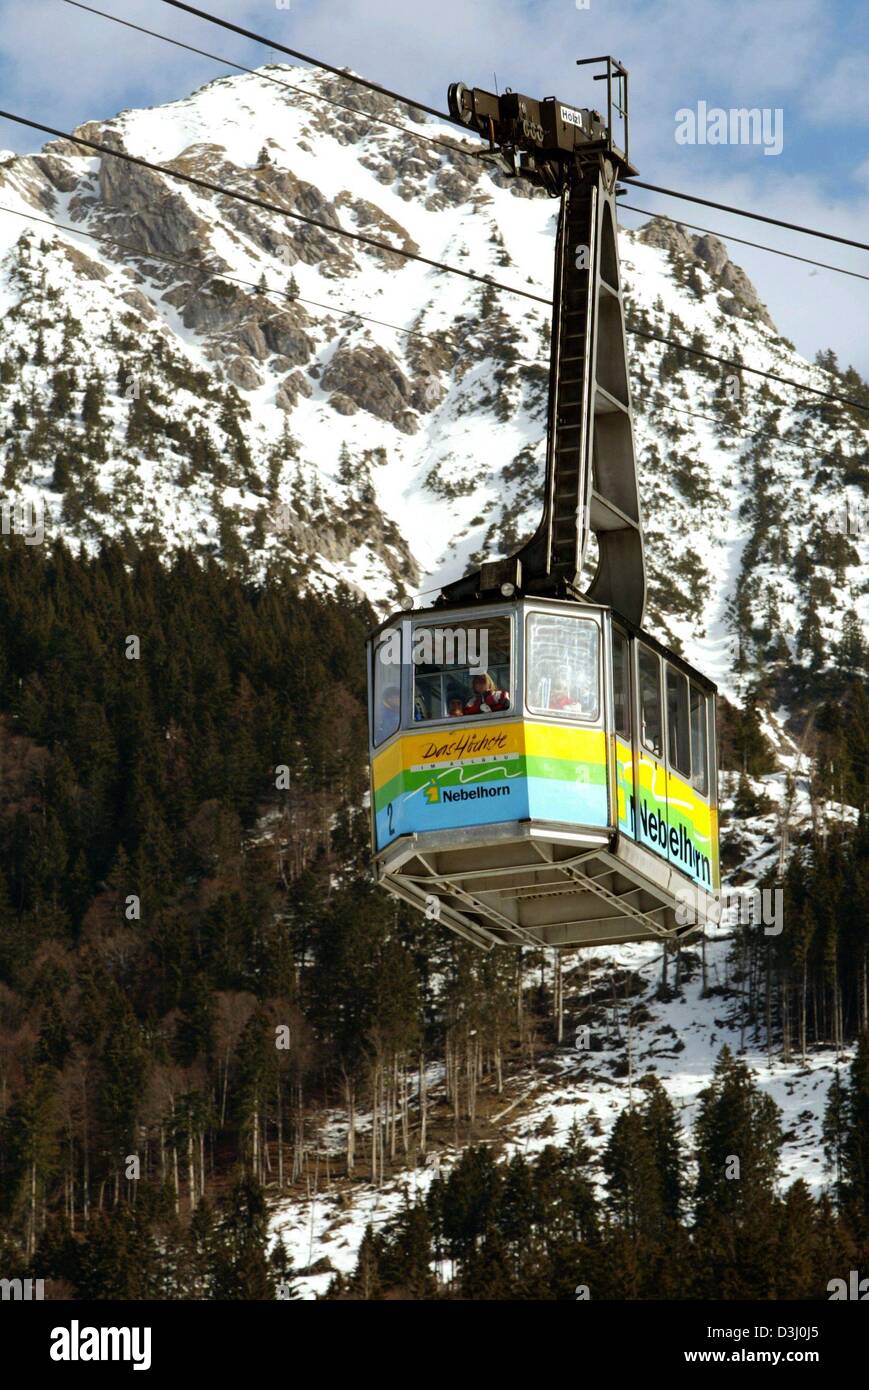 (dpa) - The cabin of a cable railway occupied by tourists moves slowly downhill from the 2,224 metres high peak of the Nebelhon mountain in Oberstdorf, Germany, 6 February 2004. Stock Photo